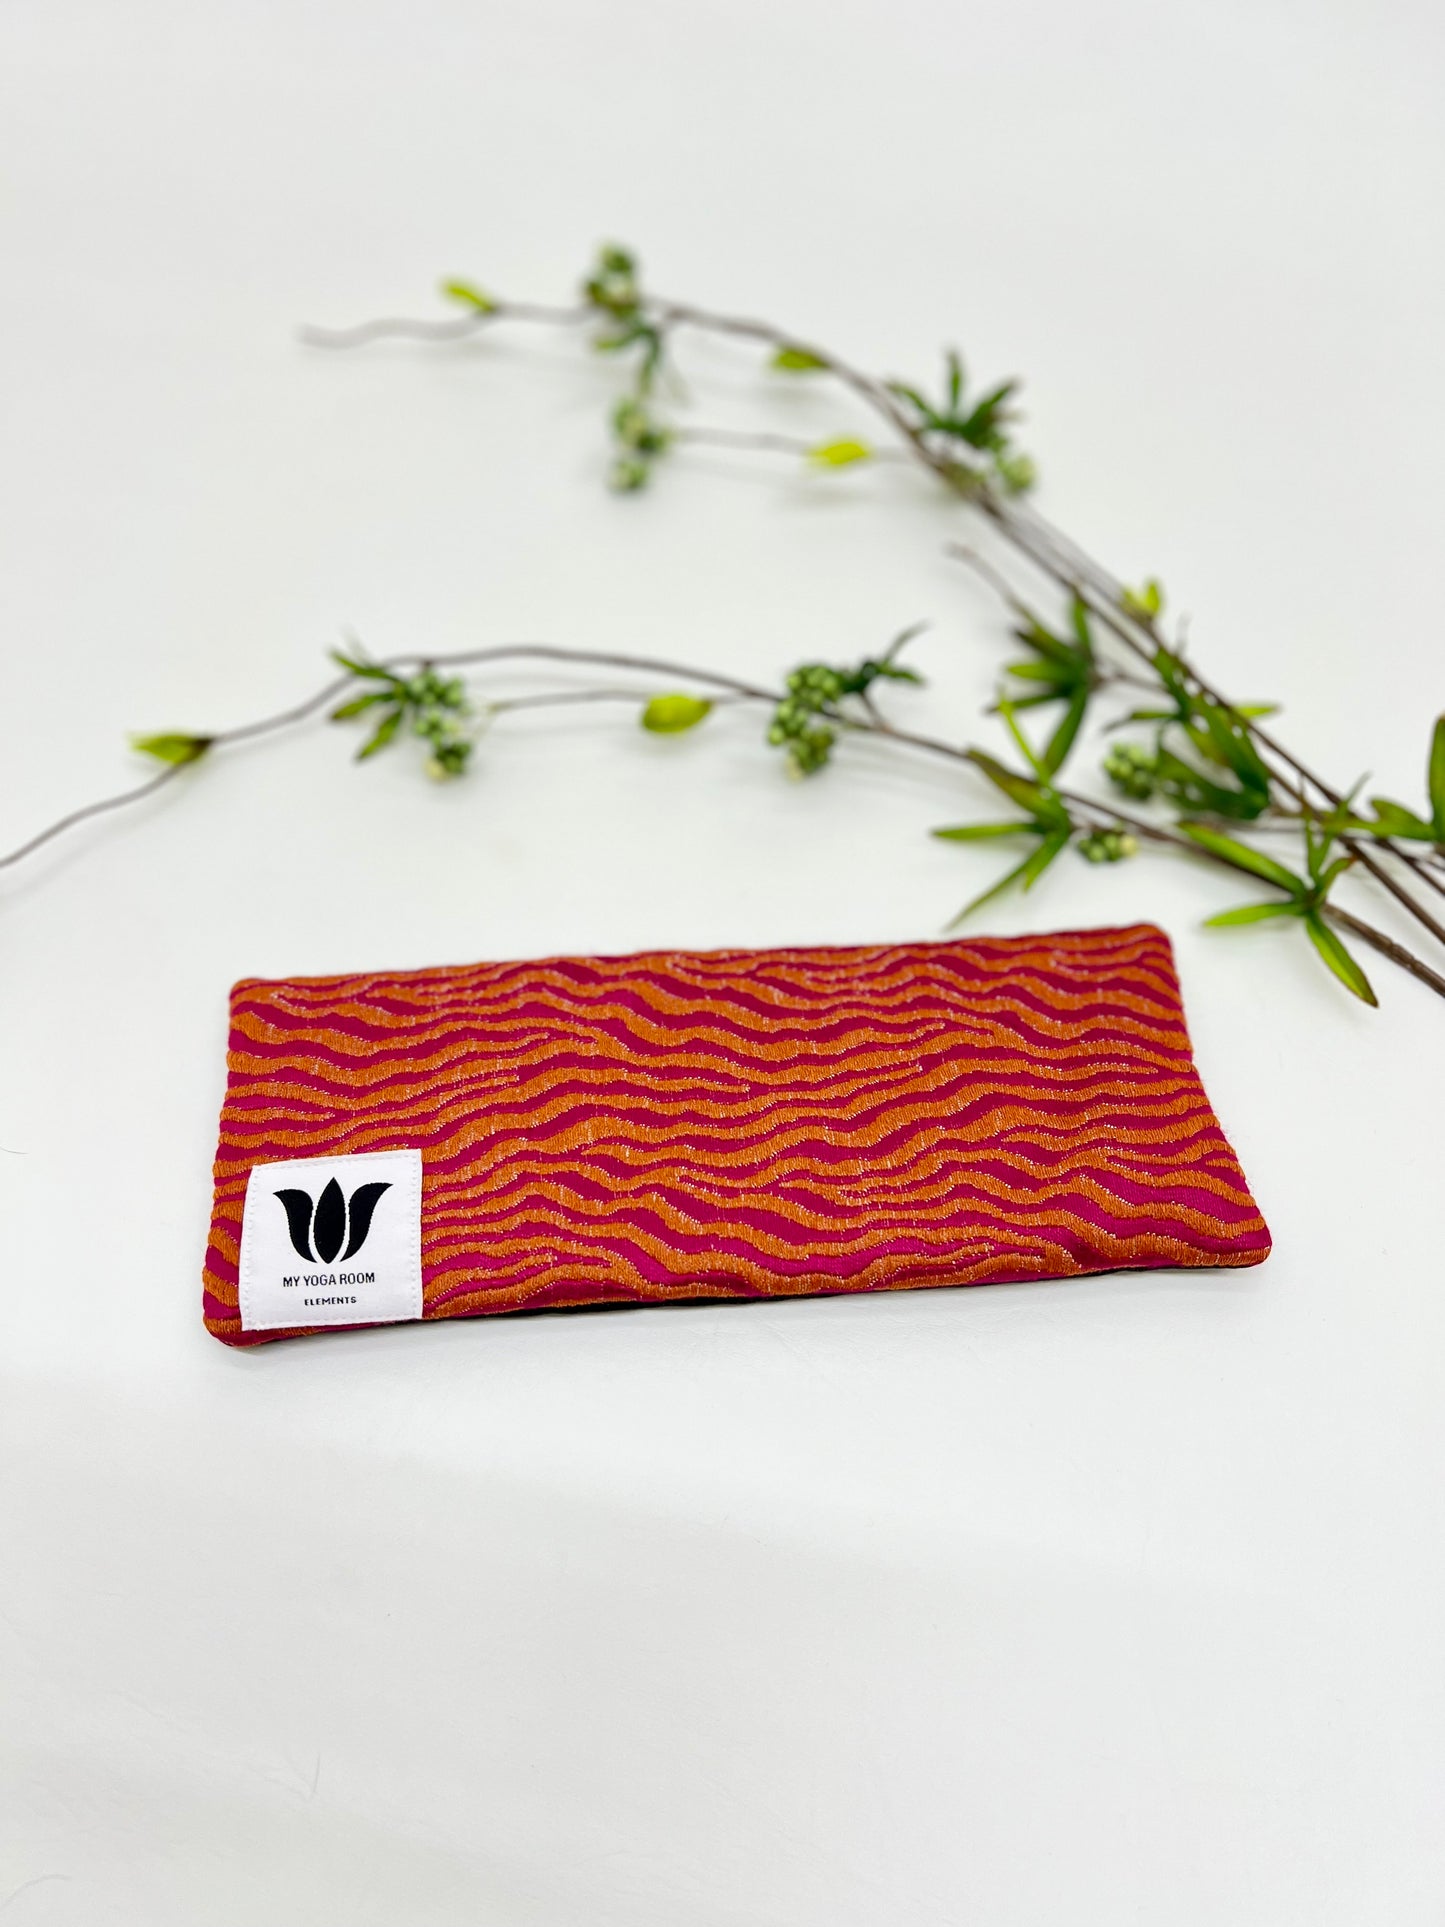 Yoga eye pillow, unscented, therapeutically weighted to soothe eye strain and stress or enhance your savasana. Handcrafted in Canada by My Yoga Room Elements. Orange/pink modern print and bamboo fabric.